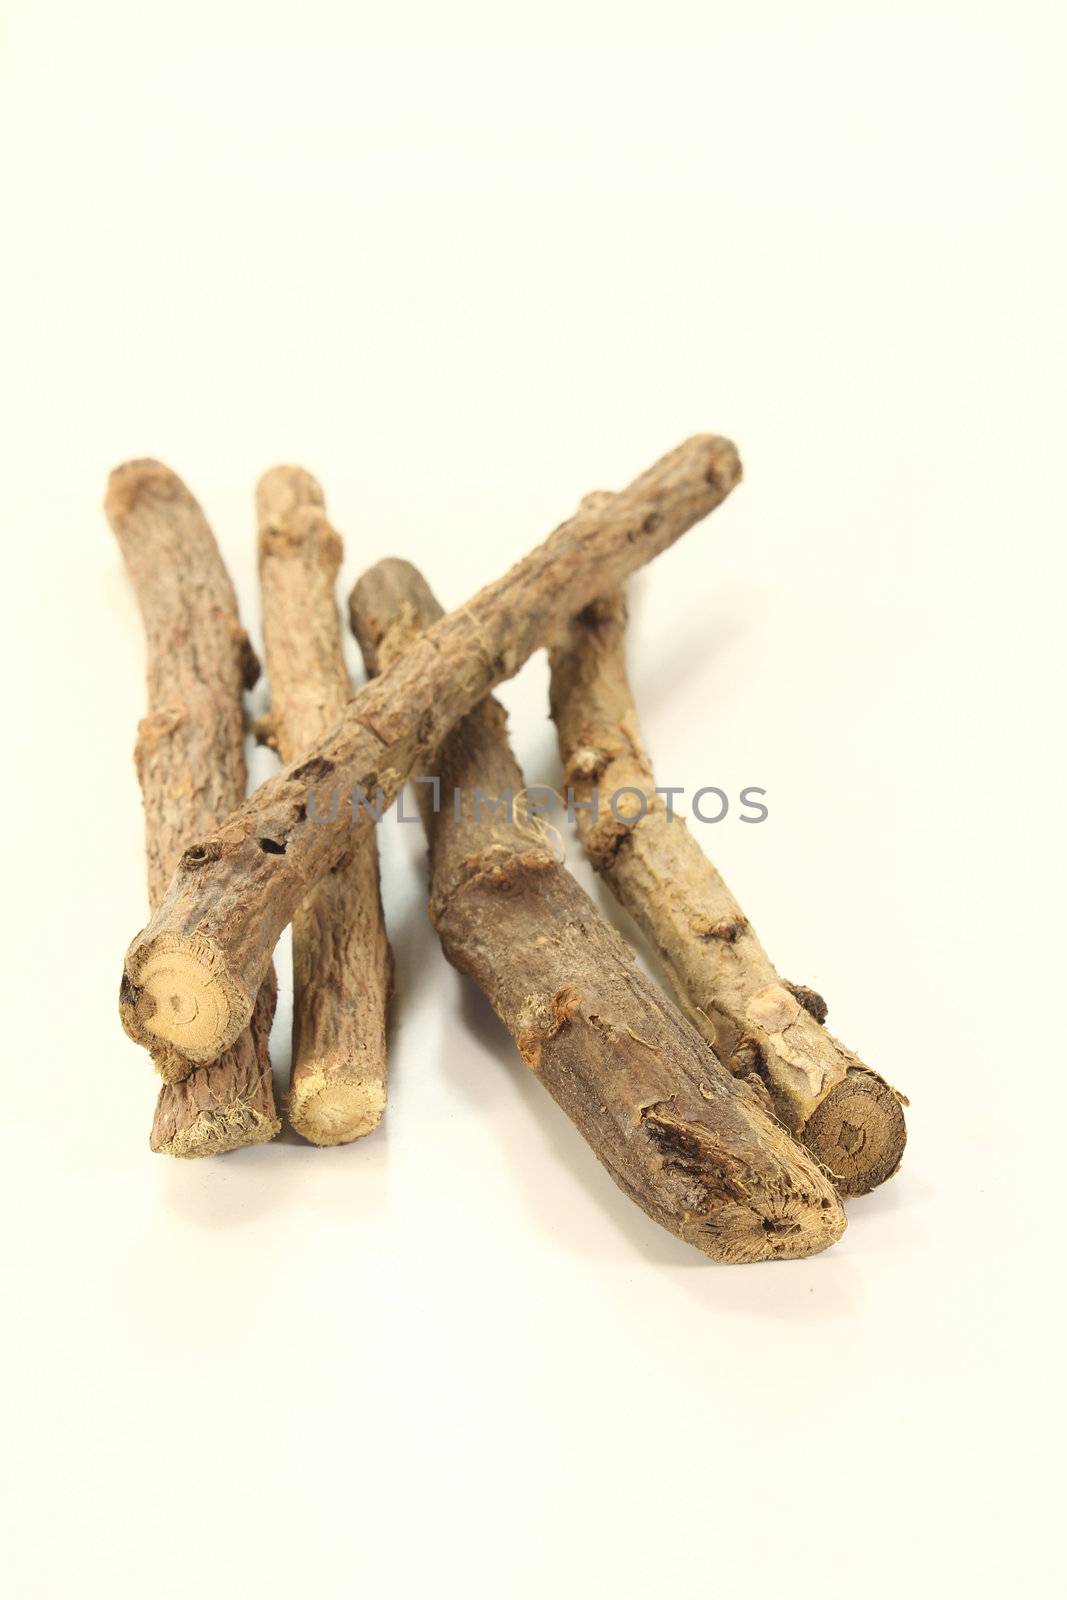 dried licorice root by discovery